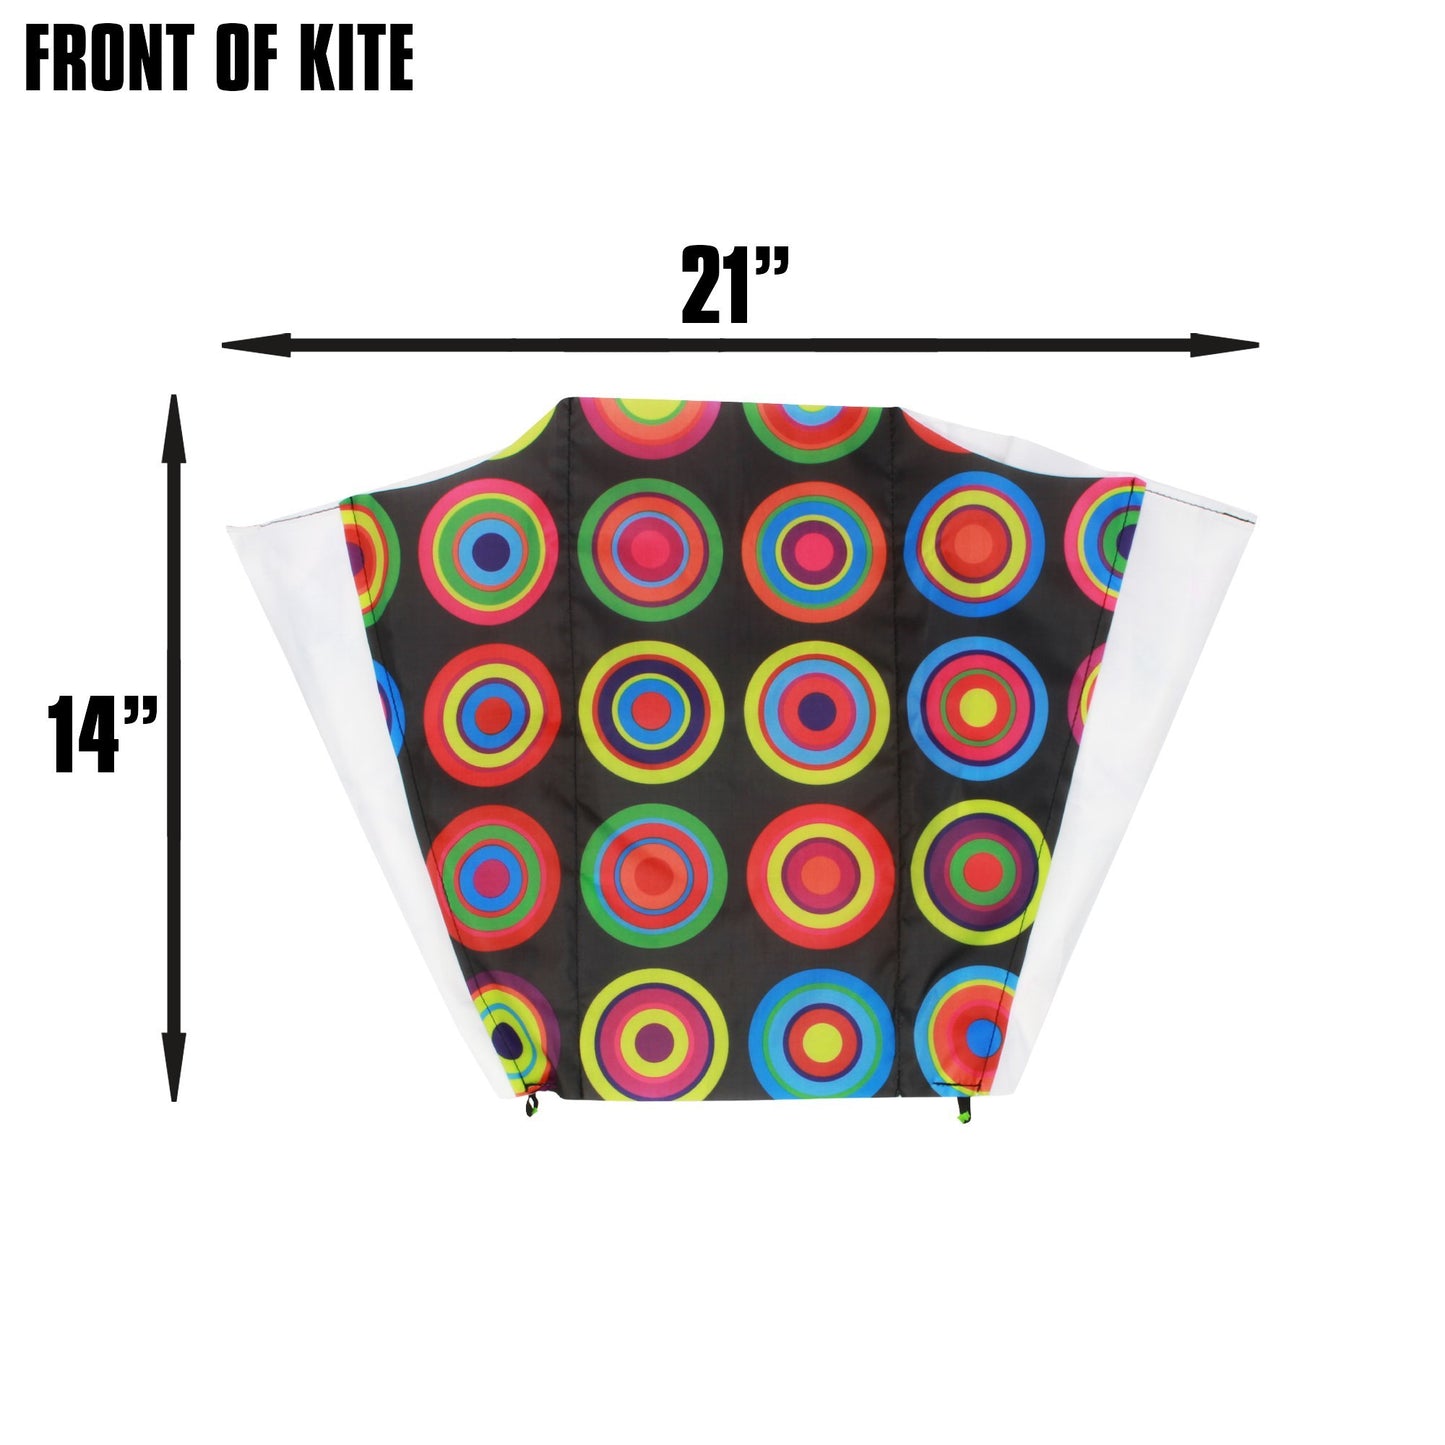 X Kites SkyFoil Hearts + Pocket Kite Circles Parafoil Kite Bundle - No Assembly Required photo showing handle